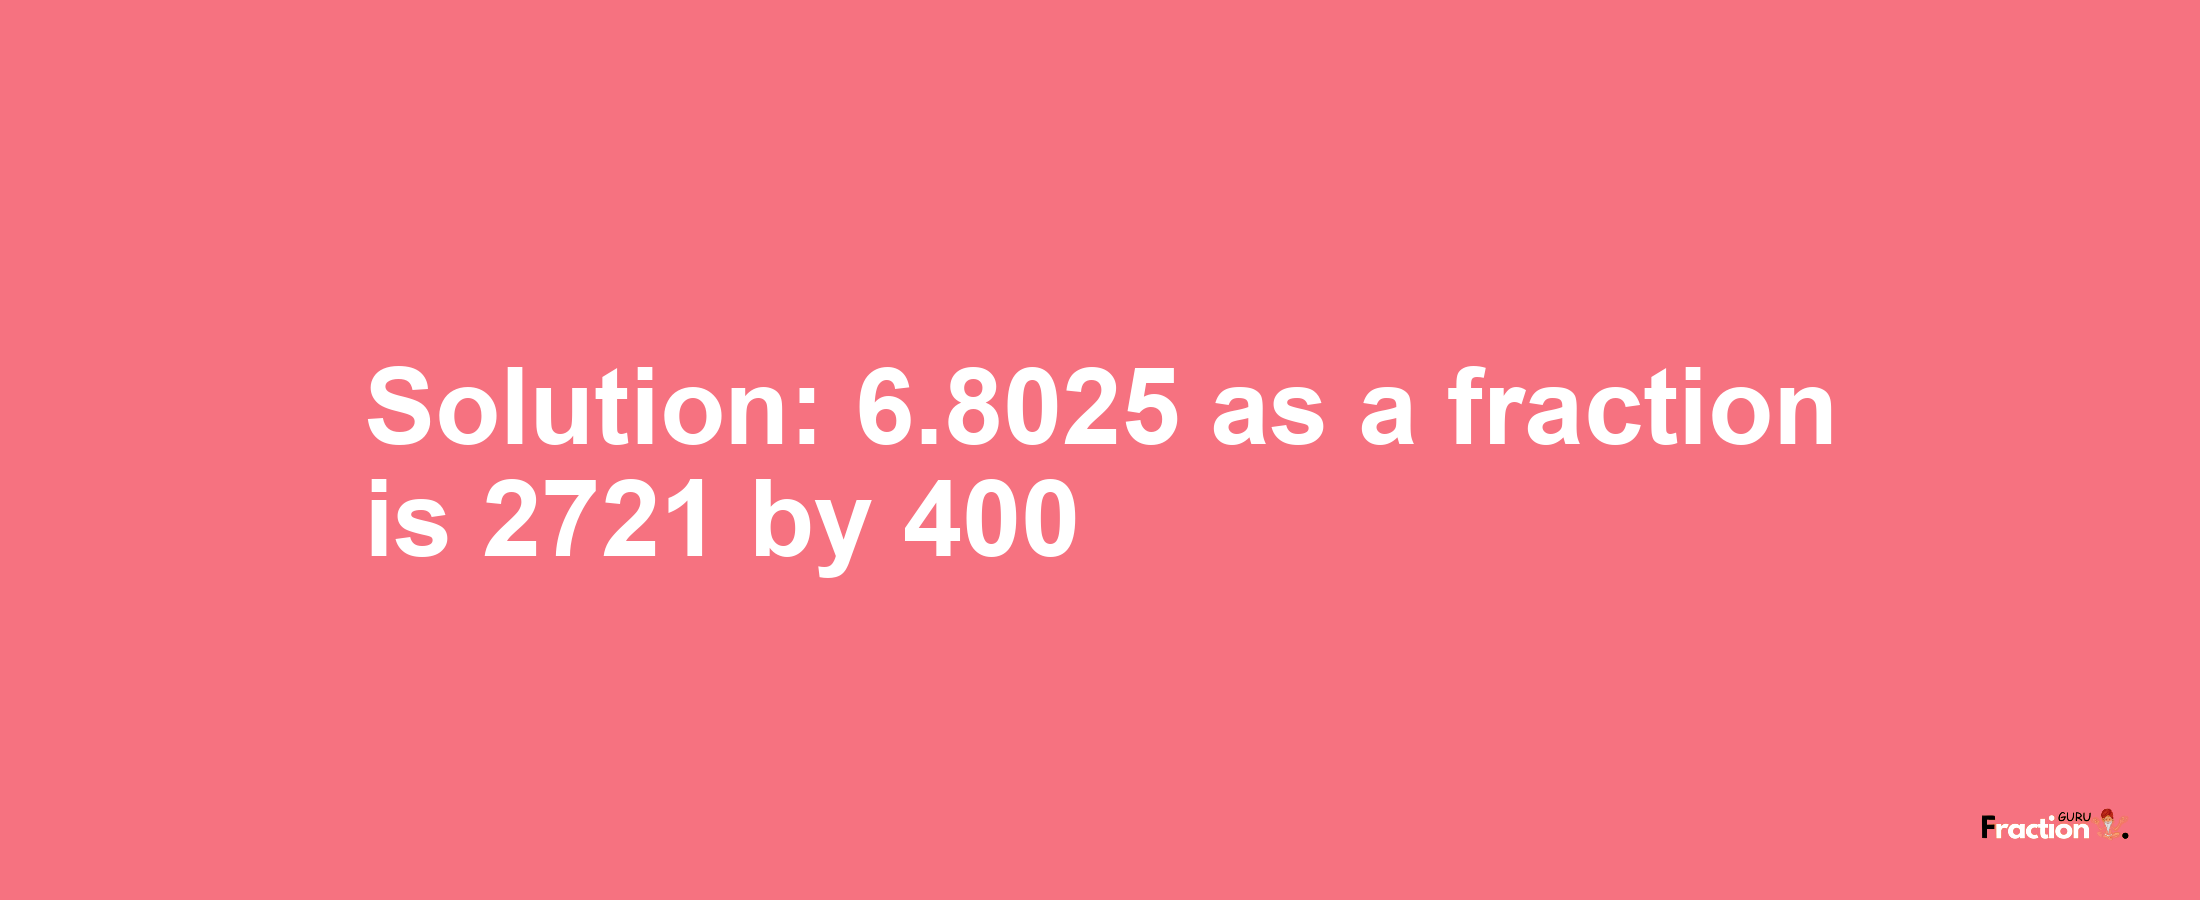 Solution:6.8025 as a fraction is 2721/400